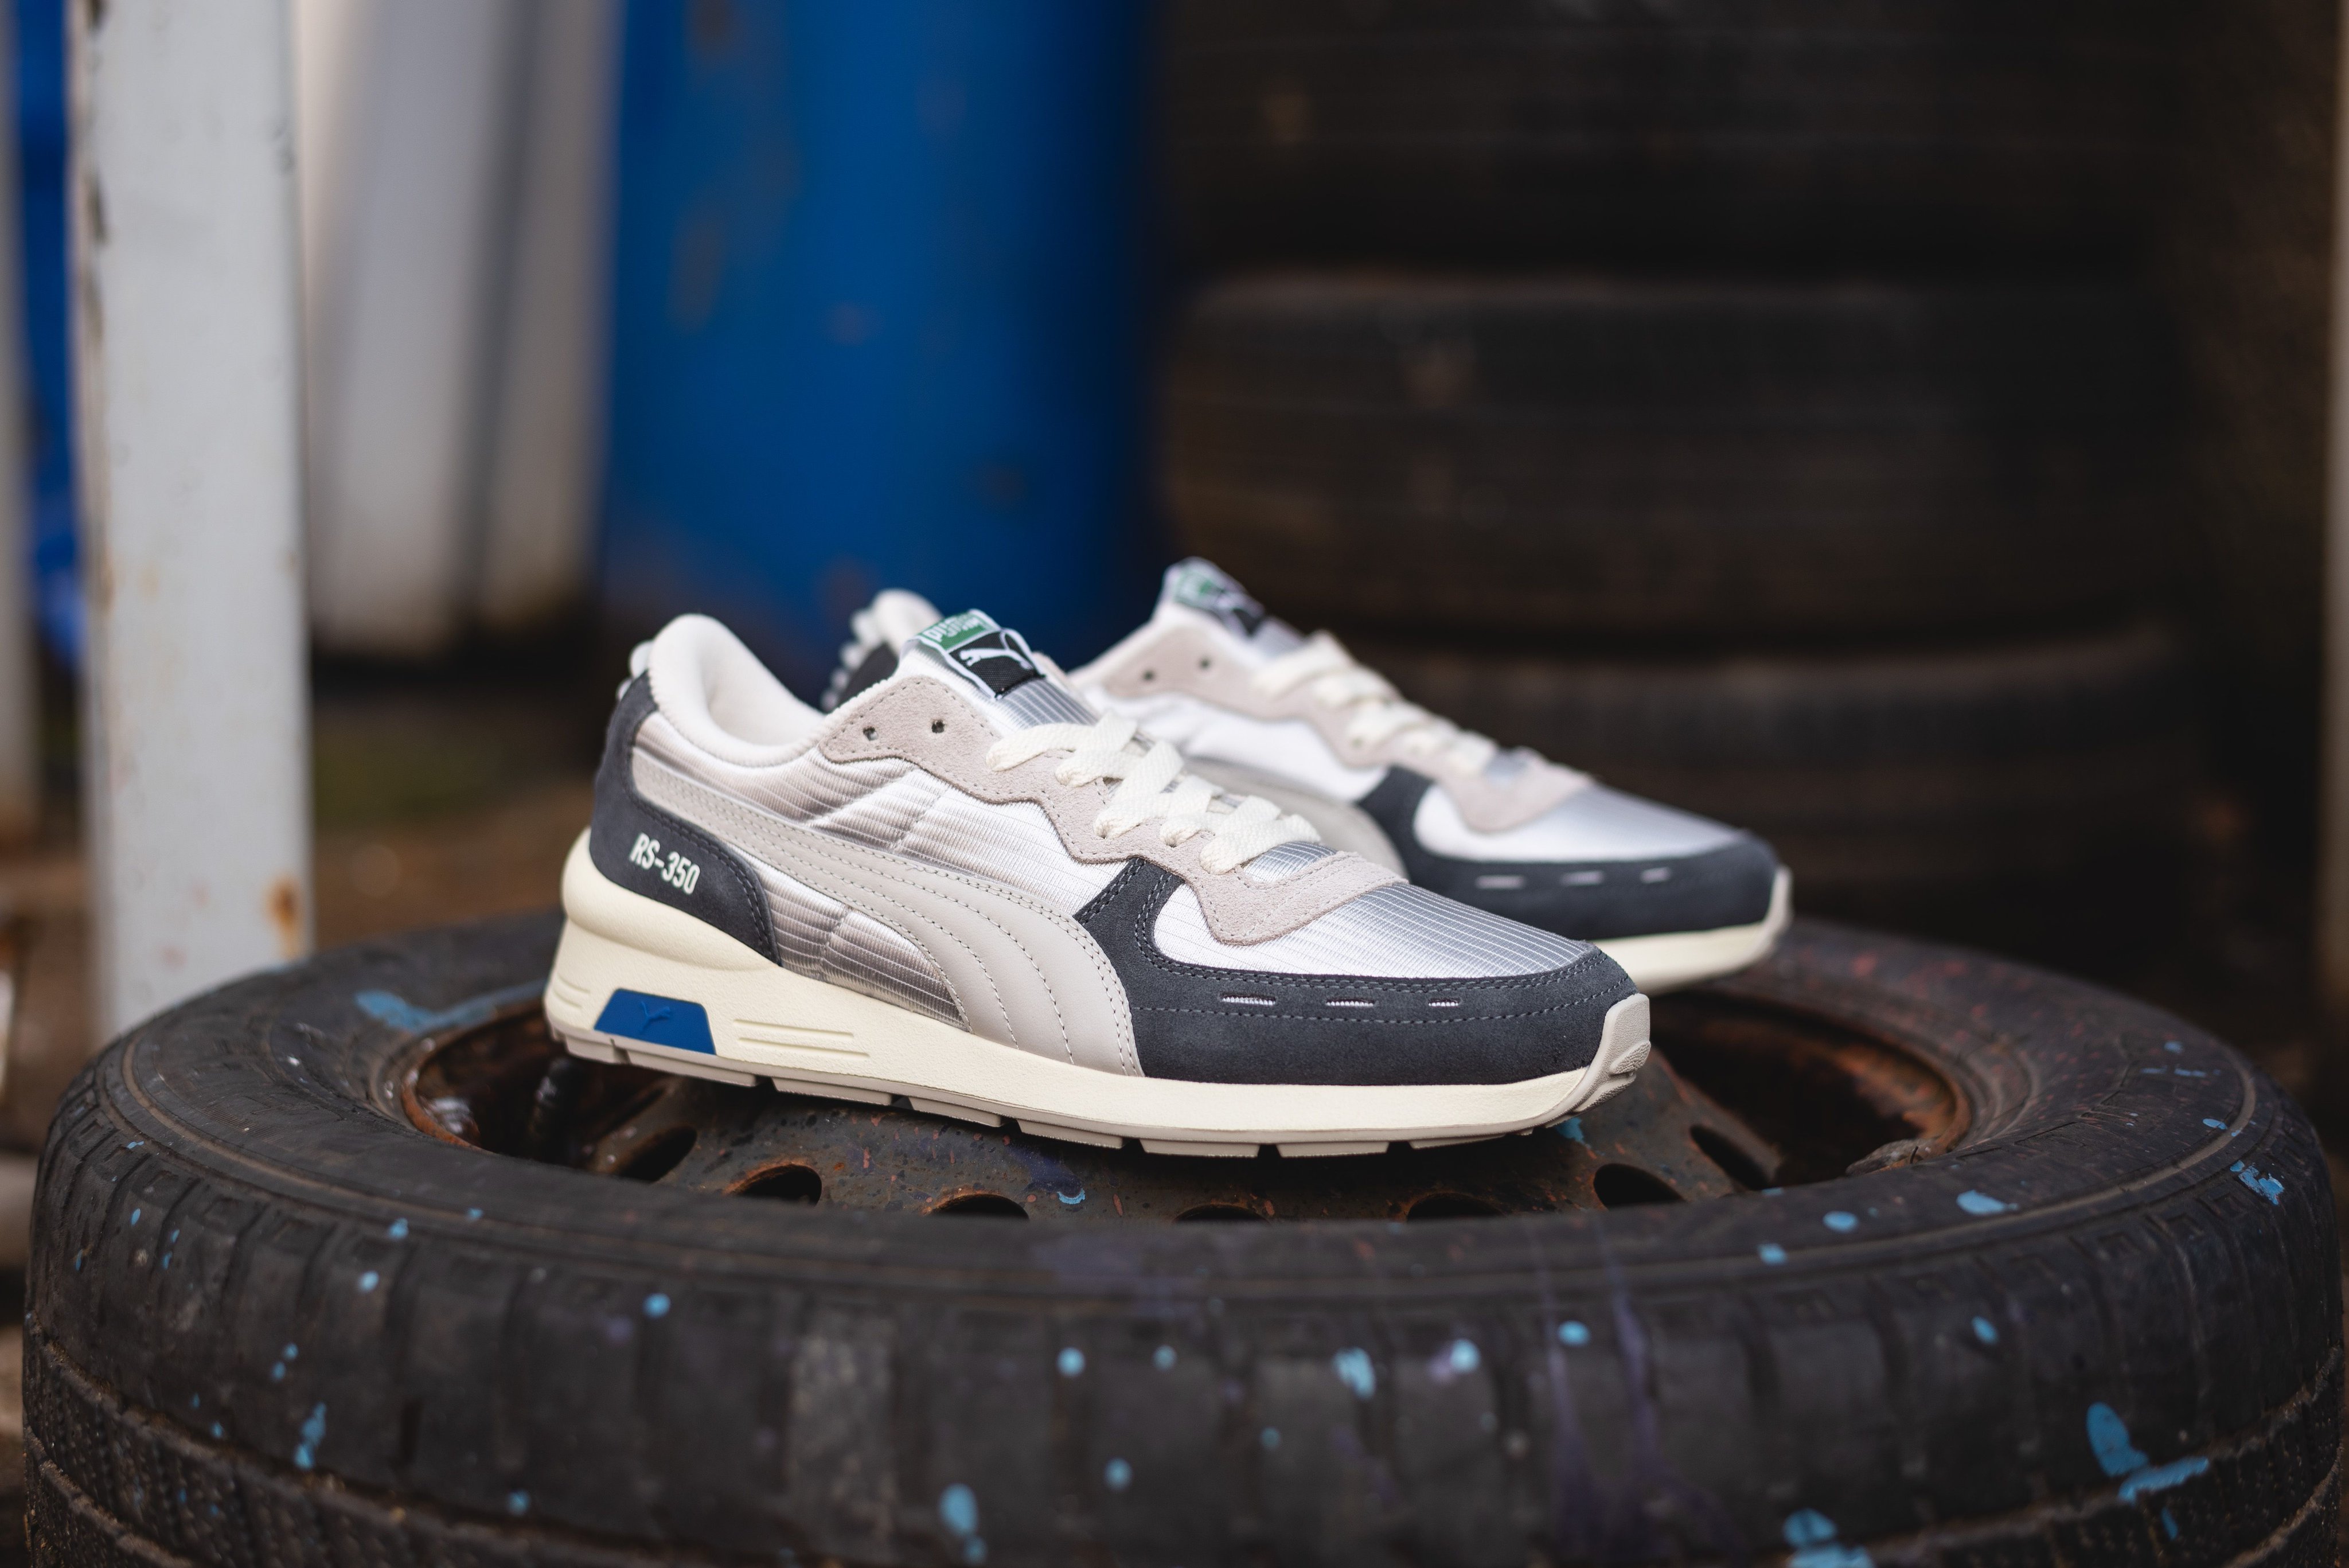 Canal Incorporar Beneficiario HANON on Twitter: "PUMA RS-350 OG is available to buy ONLINE now! #hanon # puma #rs350 https://t.co/HcB1fdj5Po https://t.co/UjktuhFlNh" / Twitter